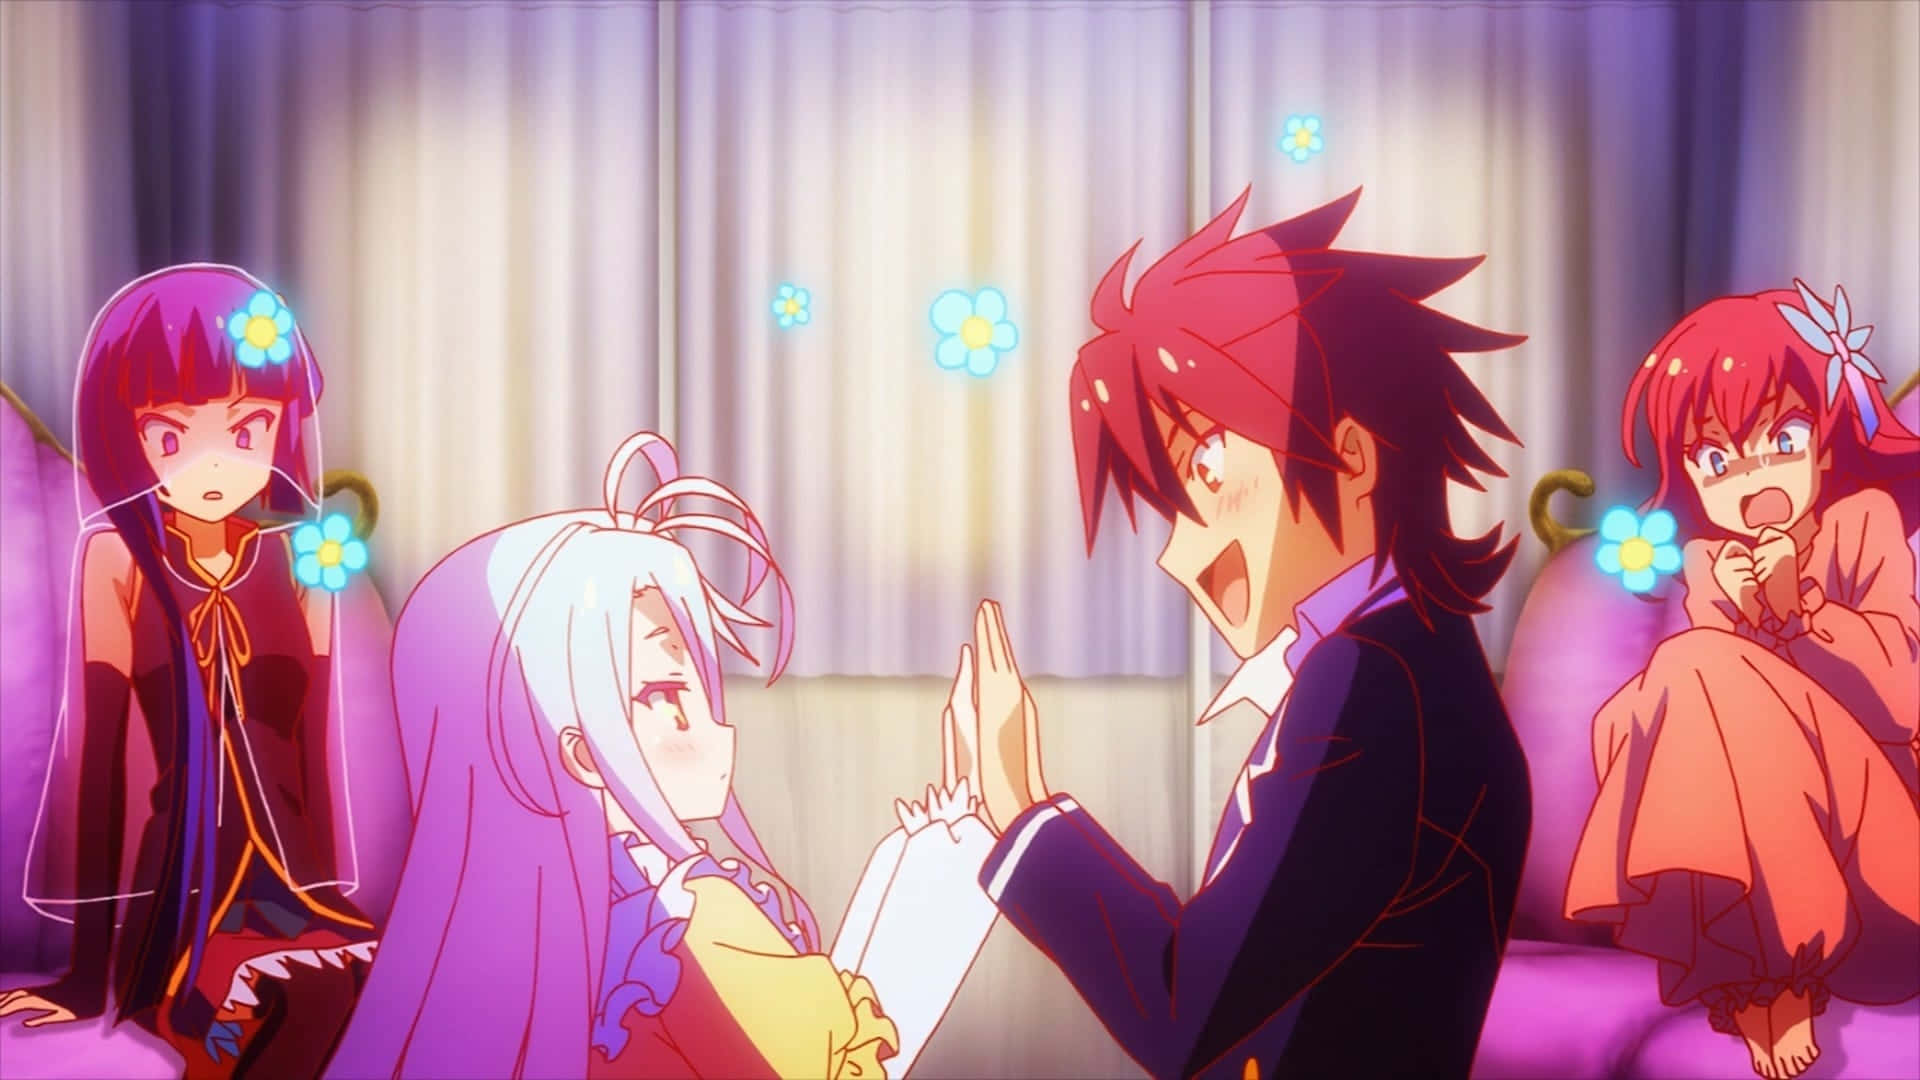 No Game No Life - The Endless Possibilities